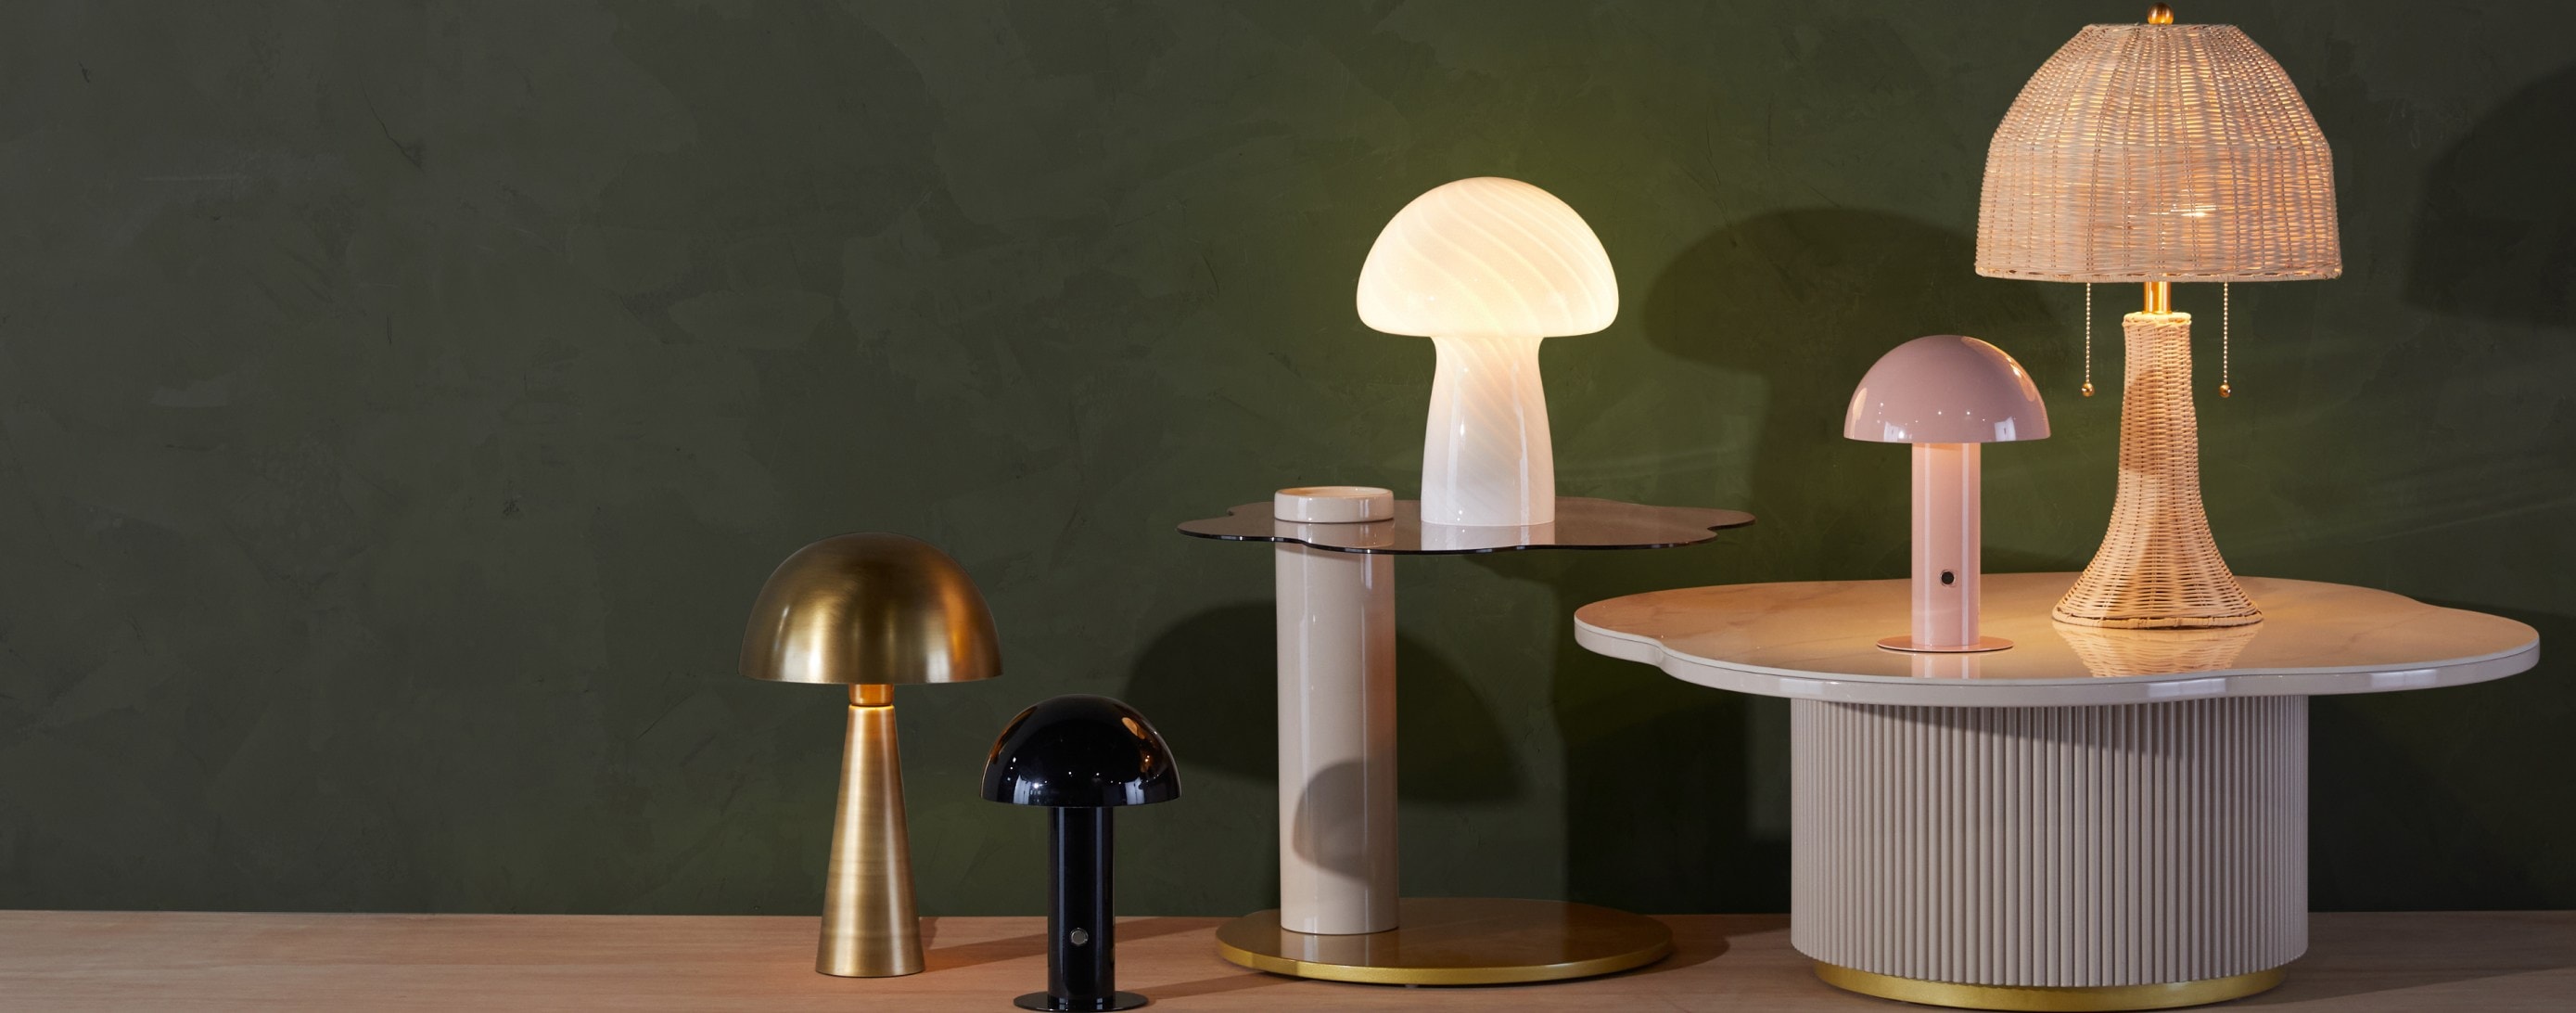 Several table lamps with dome-shaped shades on the floor and on a table in front of a green wall available online at Overstock.